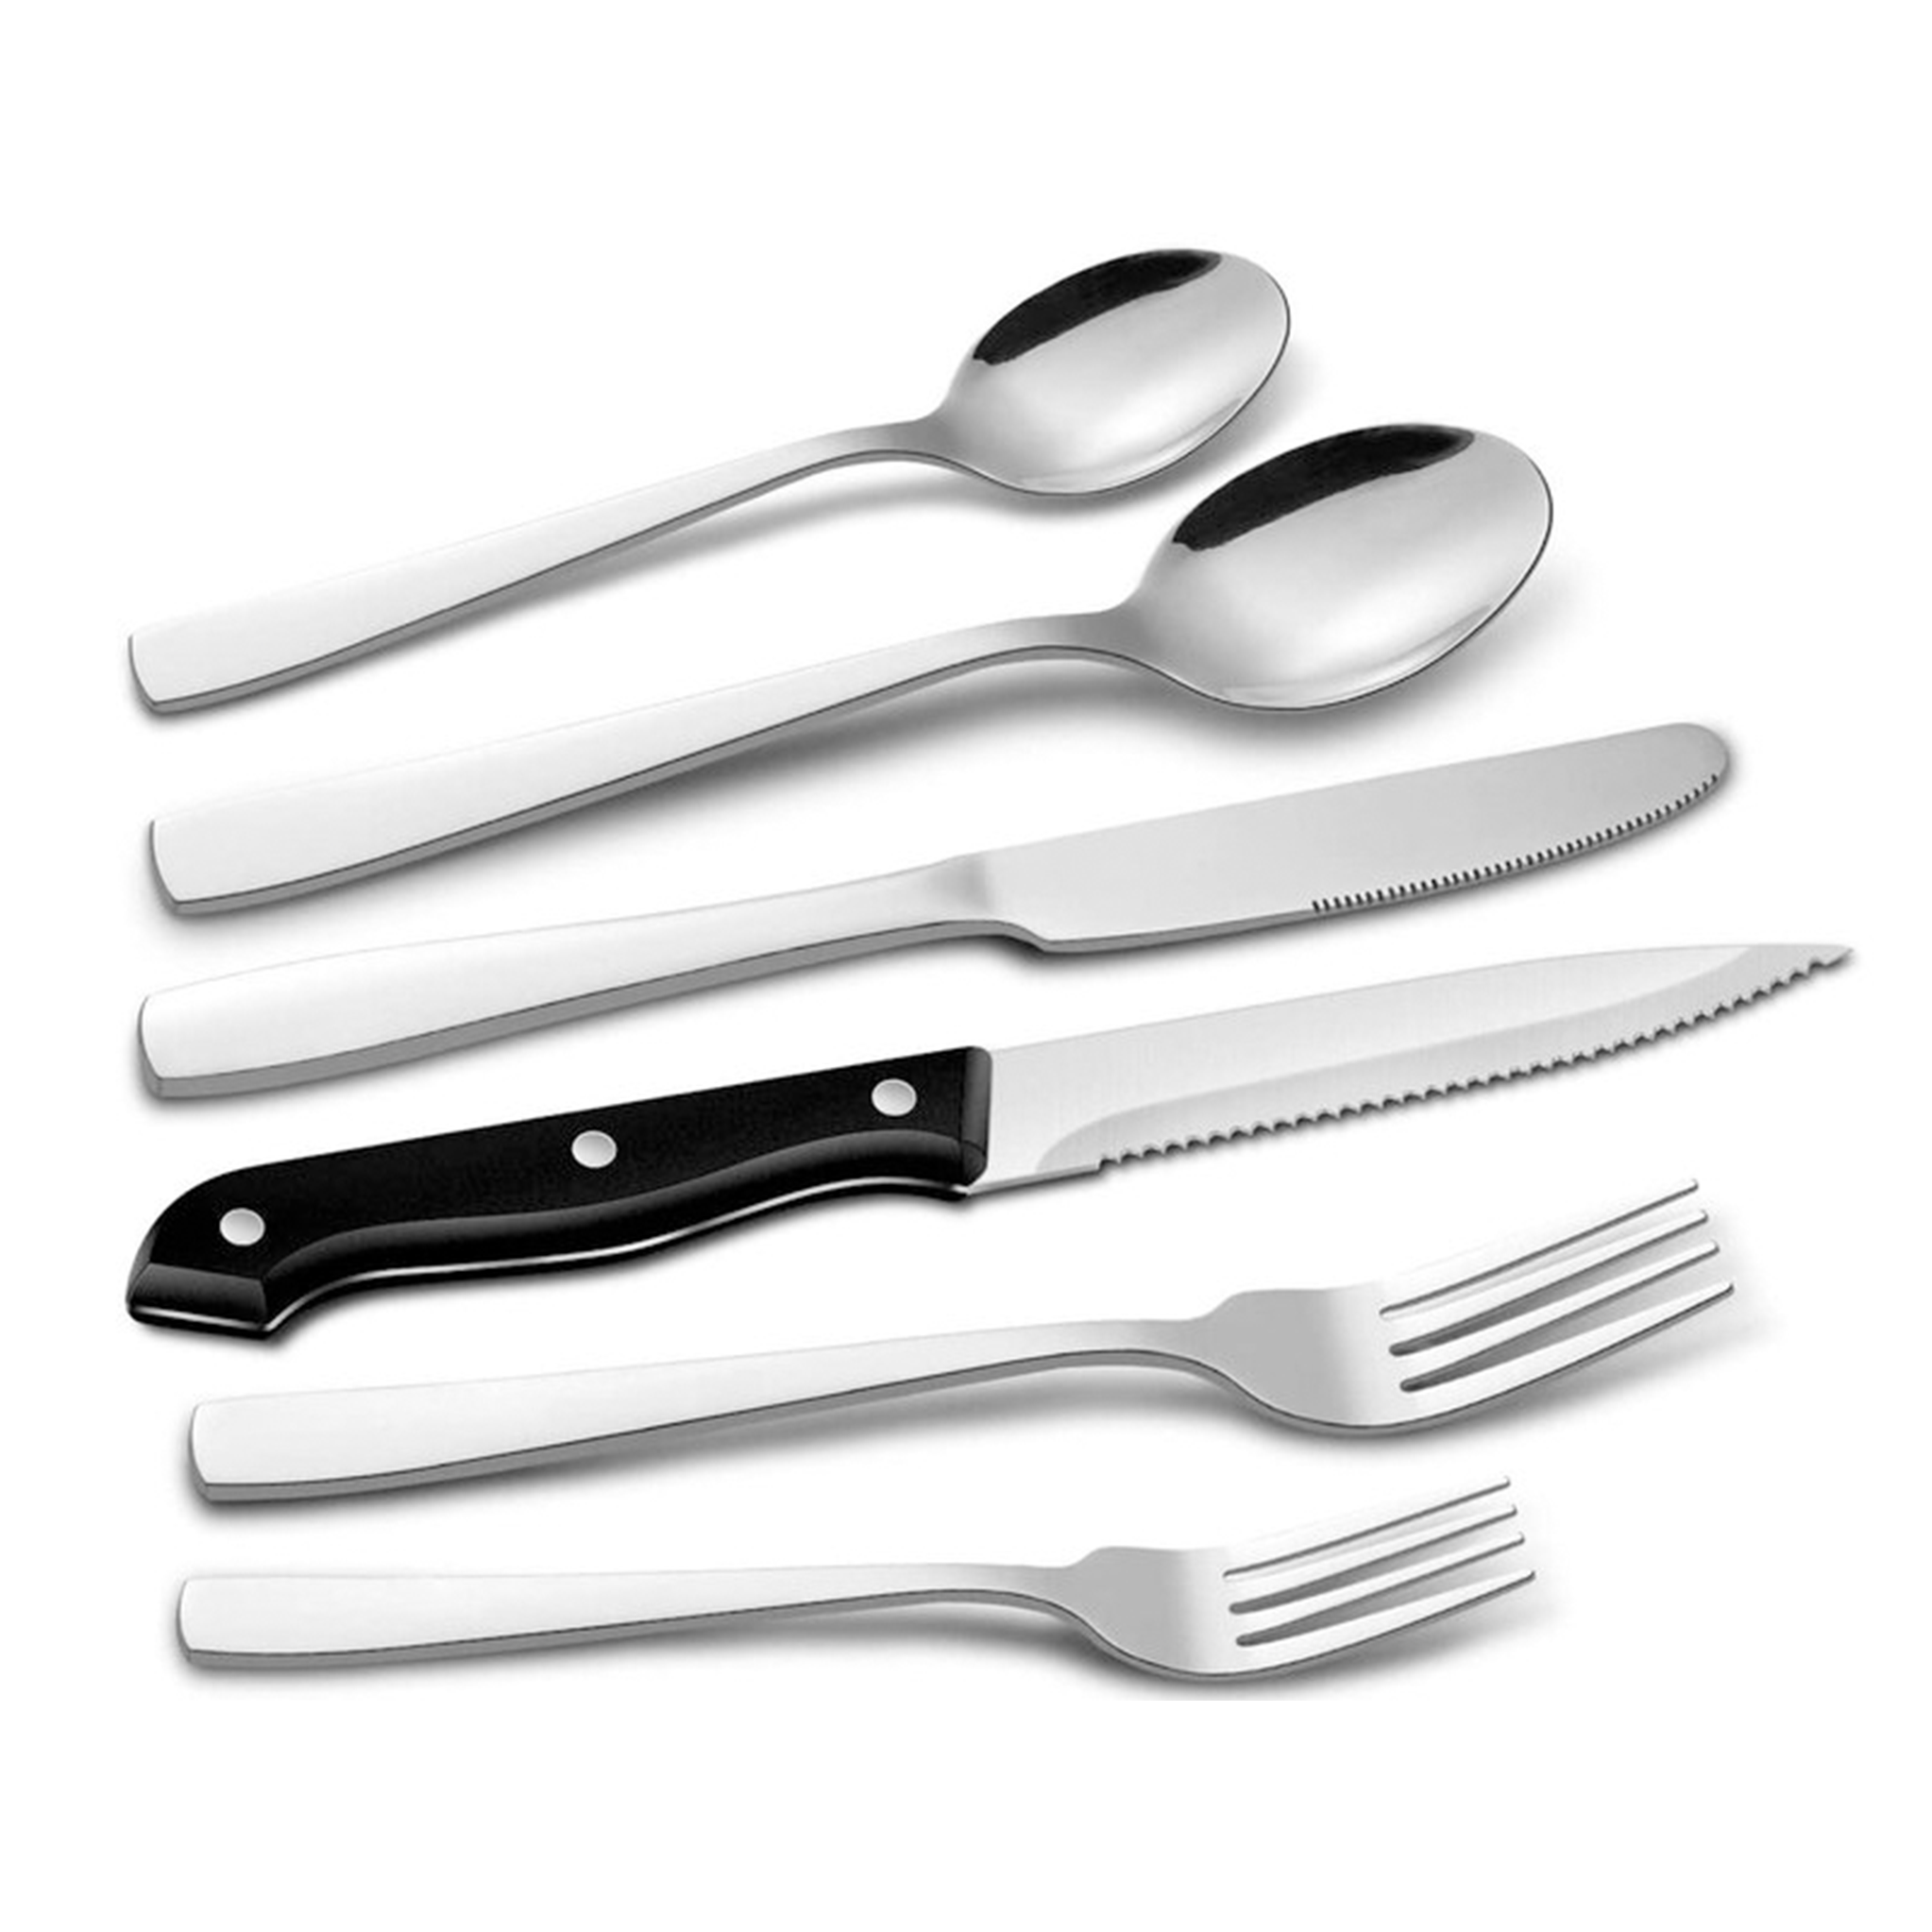 Silverware + Cutlery Set with Steak Knives - 48 Pieces